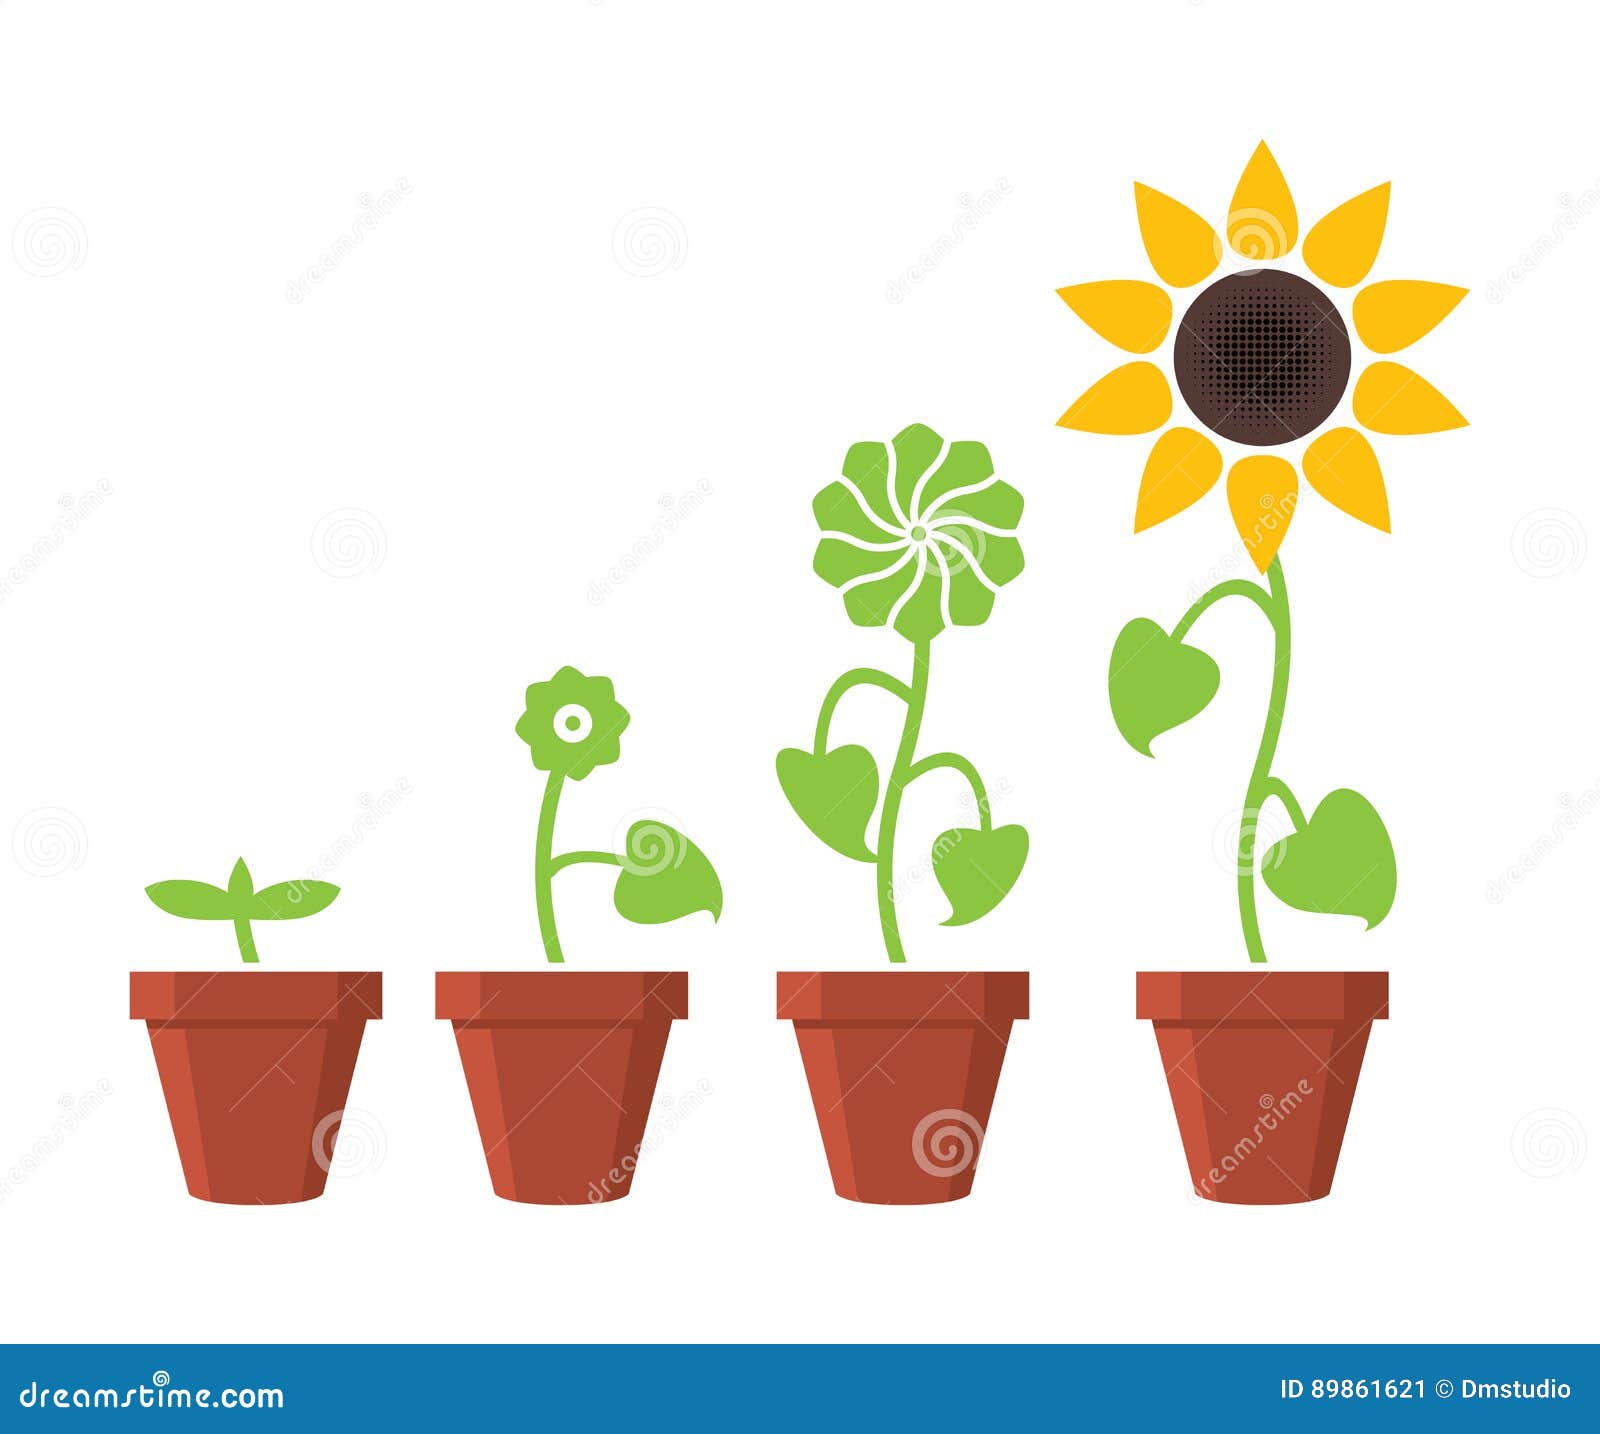 Sunflower Plant Growth Stages Concept, Vector Stock Vector ...